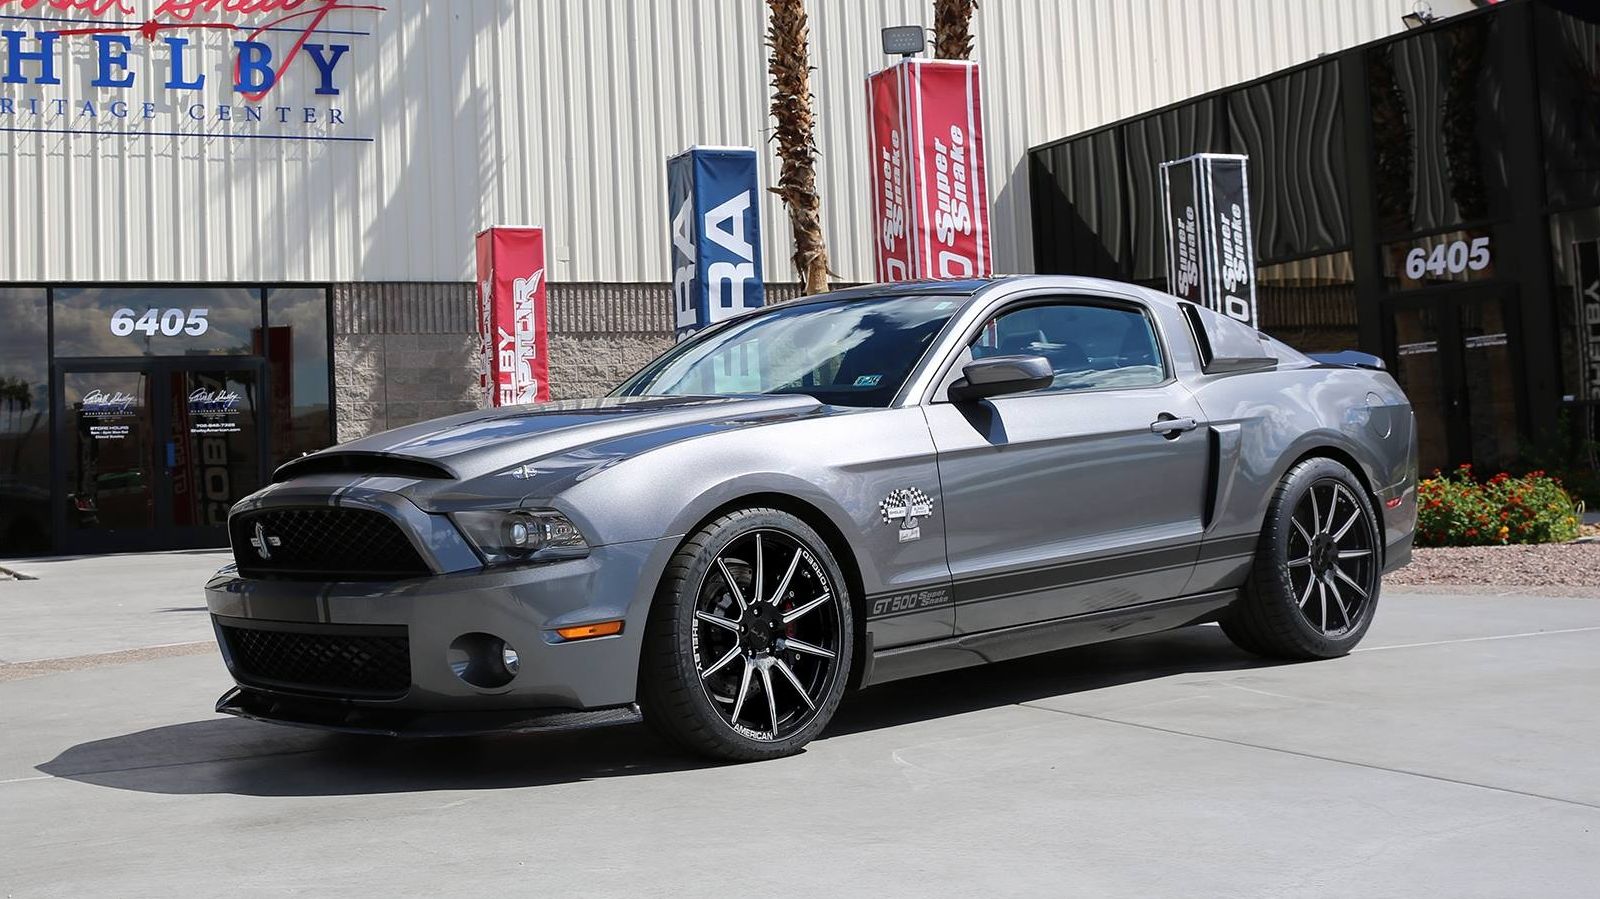  Shleby American has released a new special-edition Super Snake package for all 2007 to 2014 Ford Shelby GT500s.